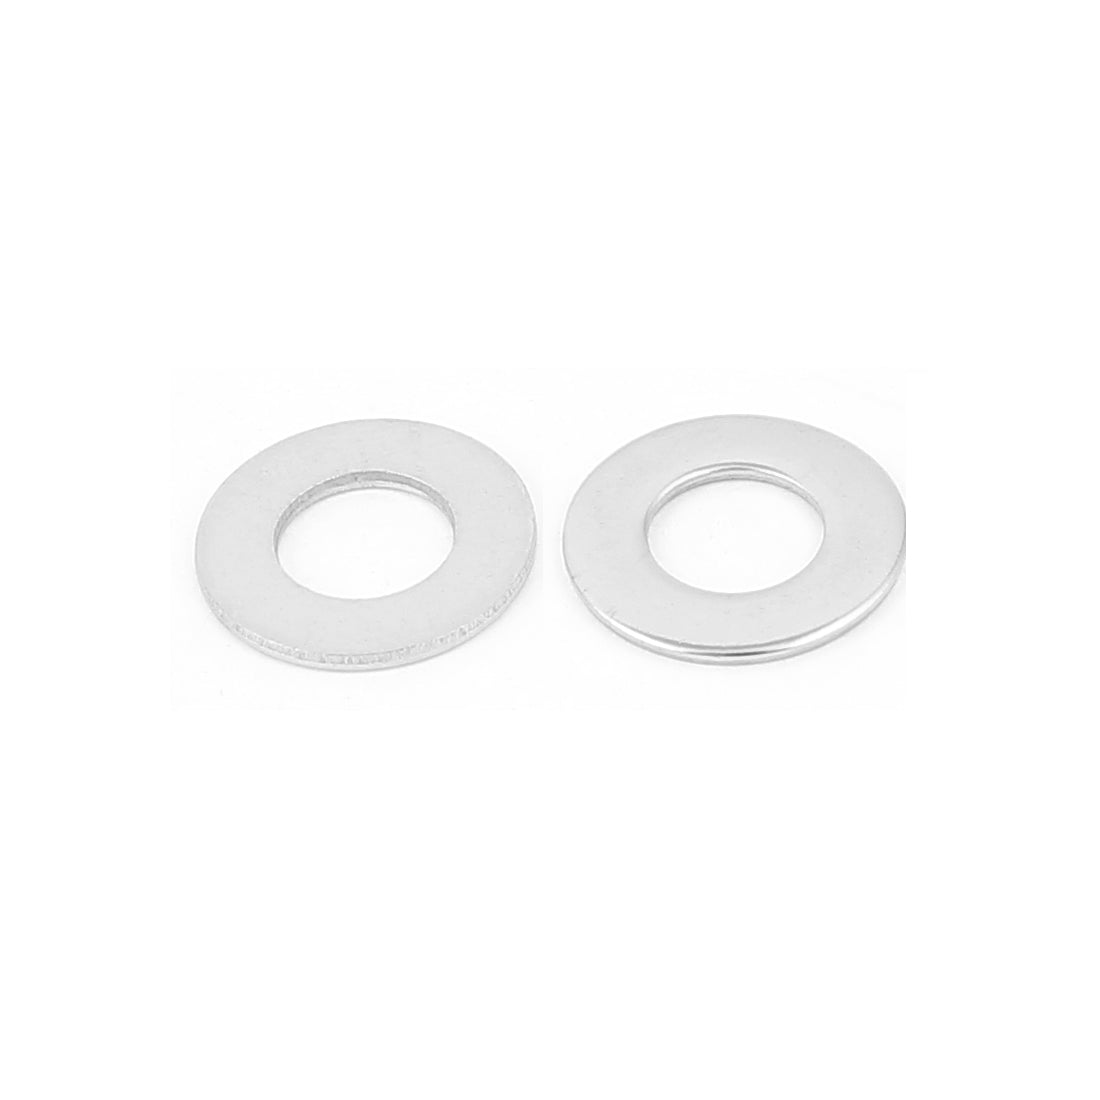 uxcell Uxcell 100pcs M8 304 Stainless Steel Plain Flat Washers for Bolt Screws